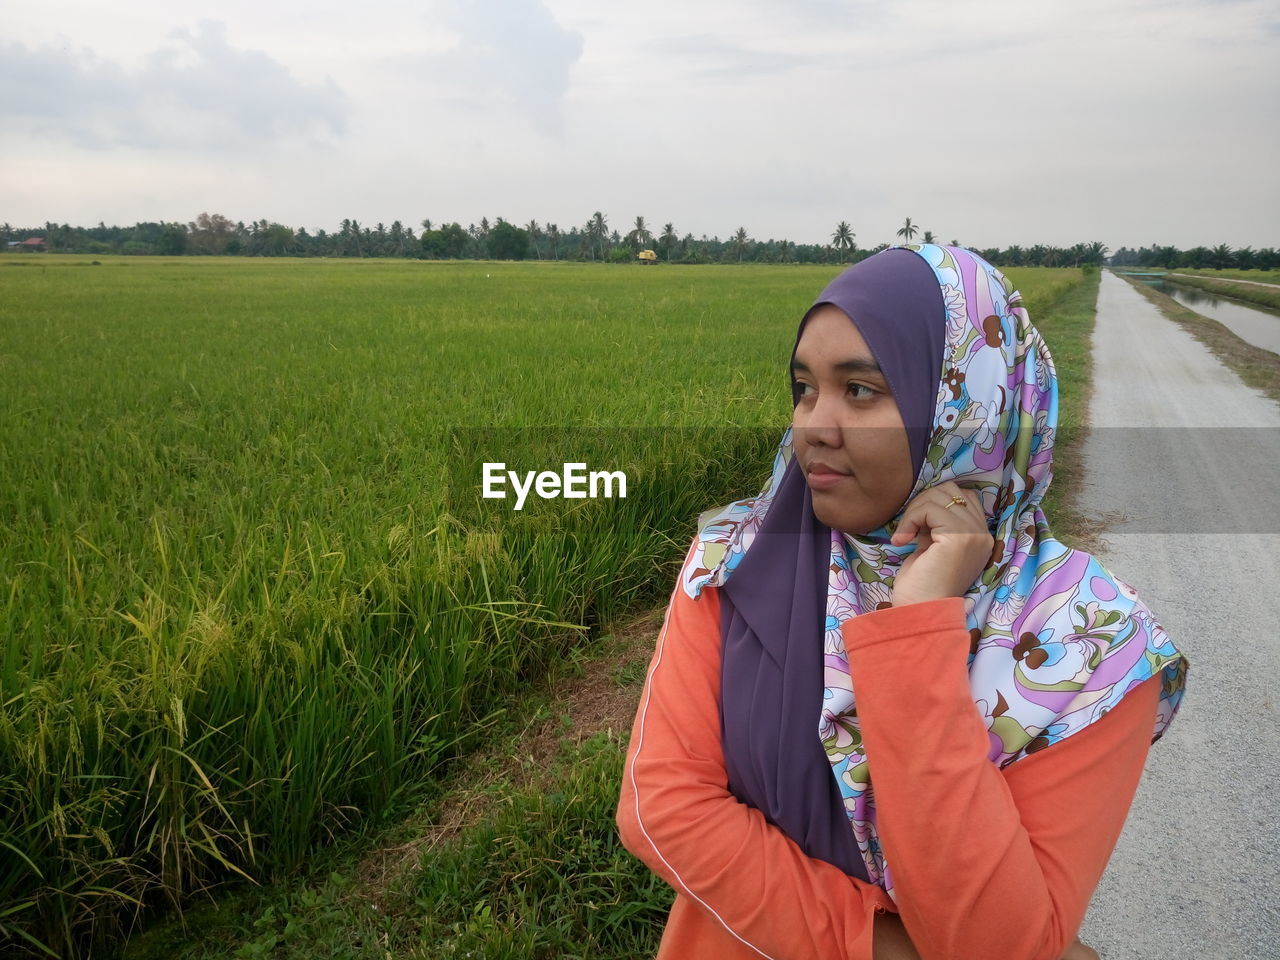 Woman in hijab looking away while standing on country road by rice paddy field